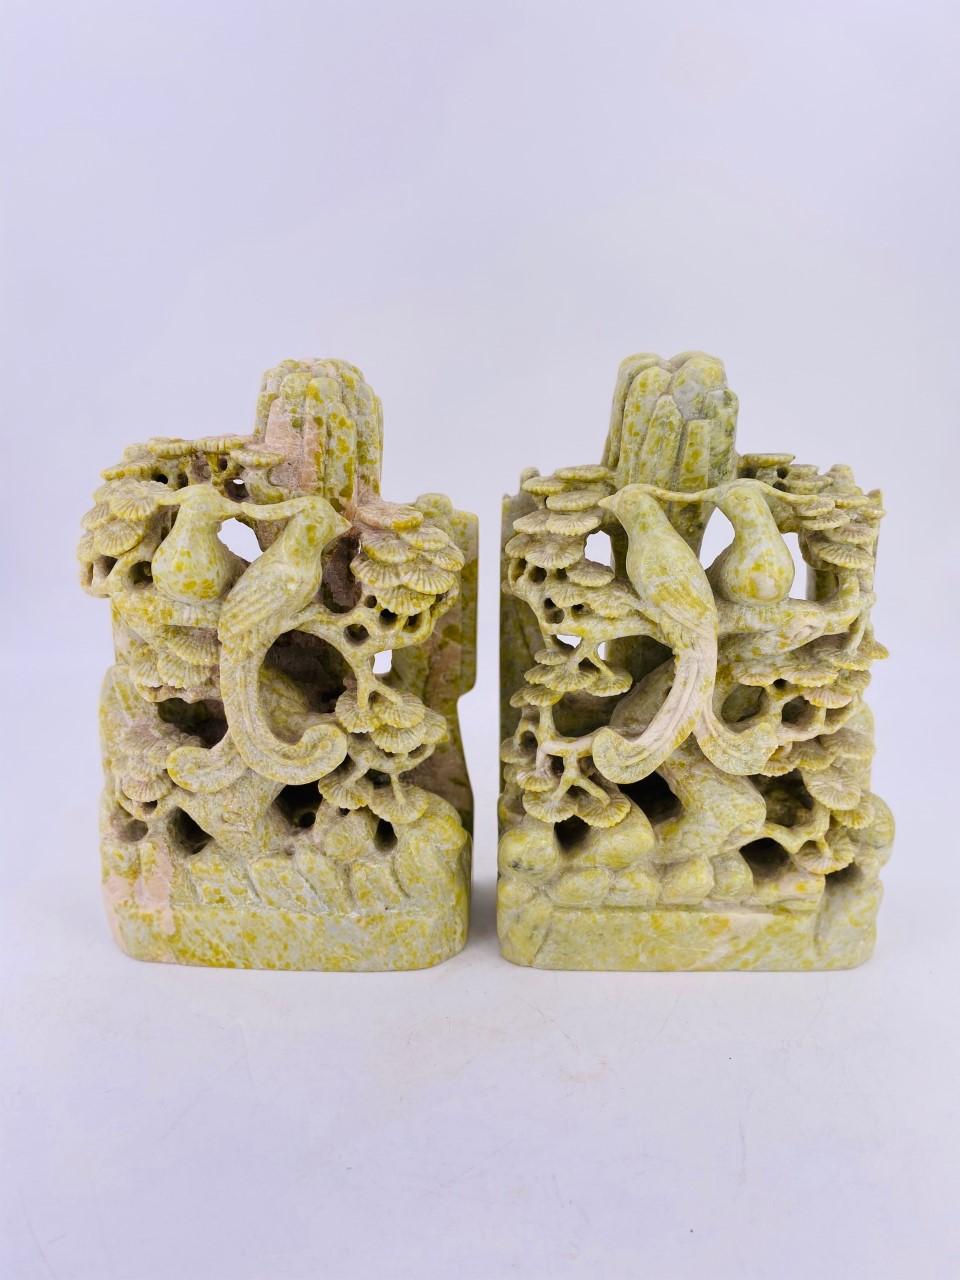 Finely carved vintage soapstone bookends. Figures of pheasants beautifully and gracefully carved in these bookends present imagery that moves with the eyes as the Fine detail is observed. Pheasants have been used symbolically in ancient Chinese